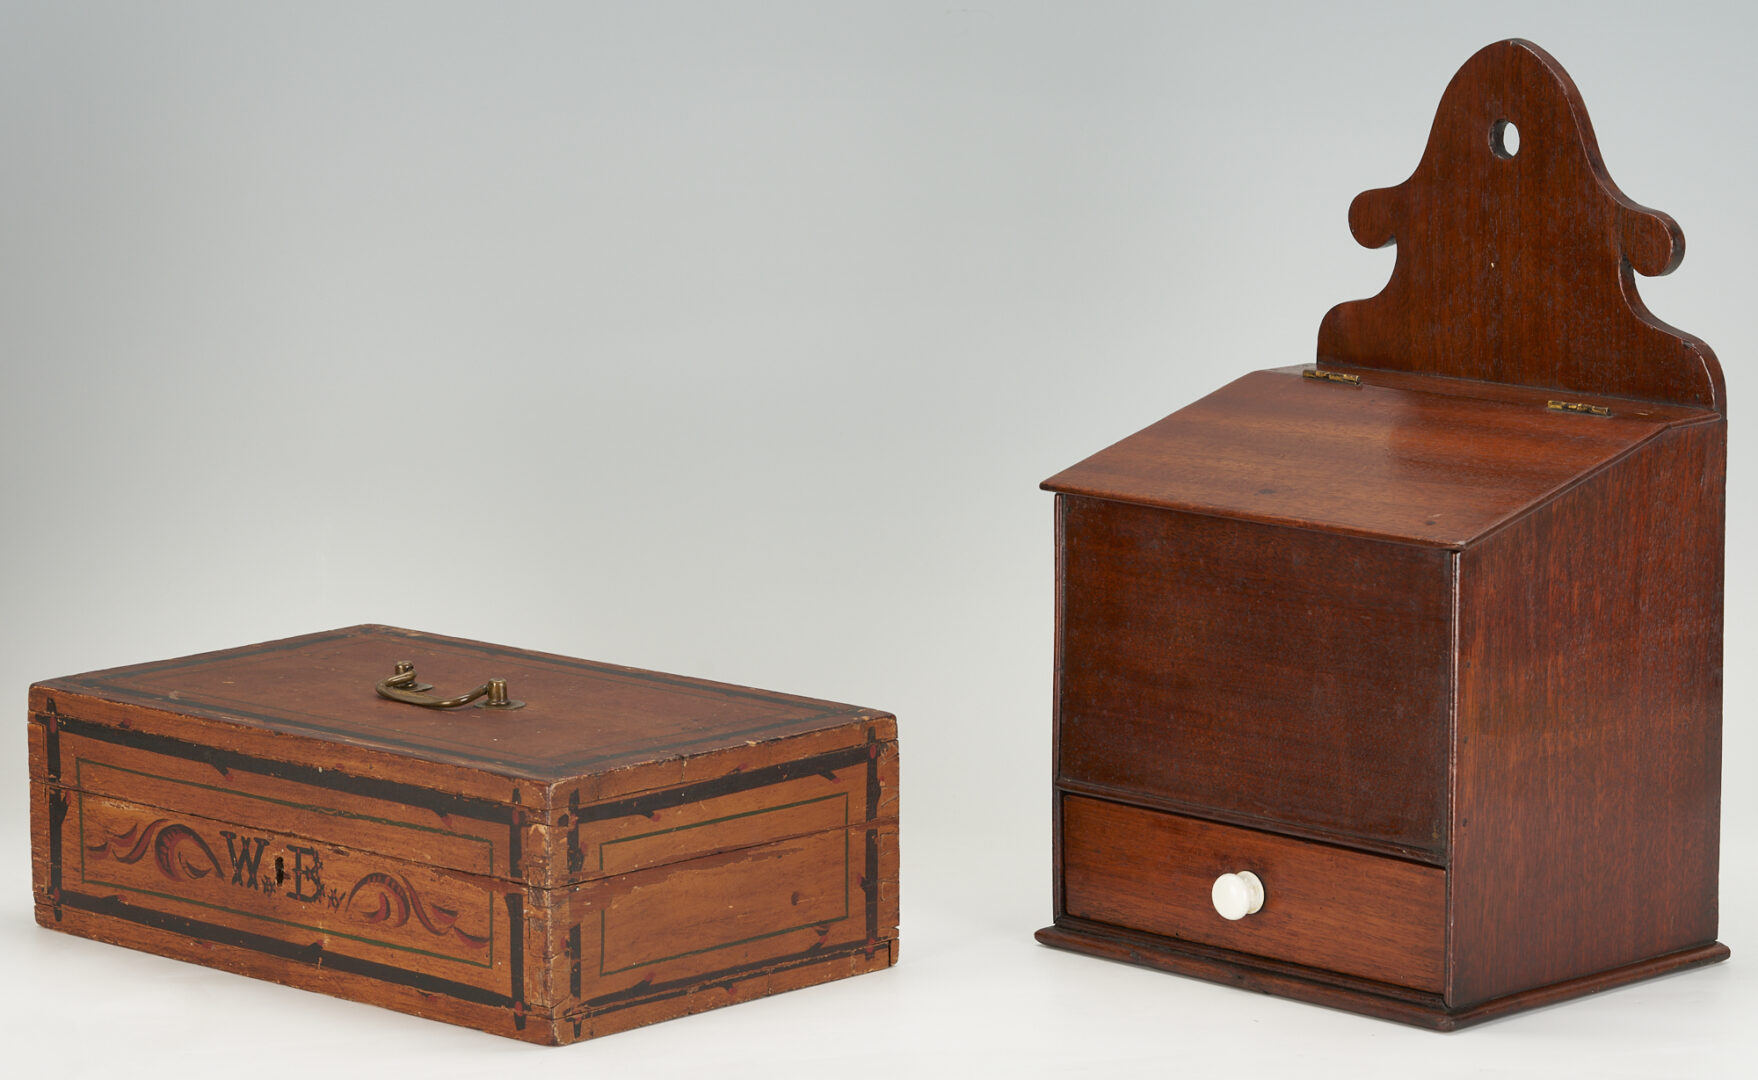 Lot 191: 4 American Folk Art Boxes, incl. Candle & Document Boxes